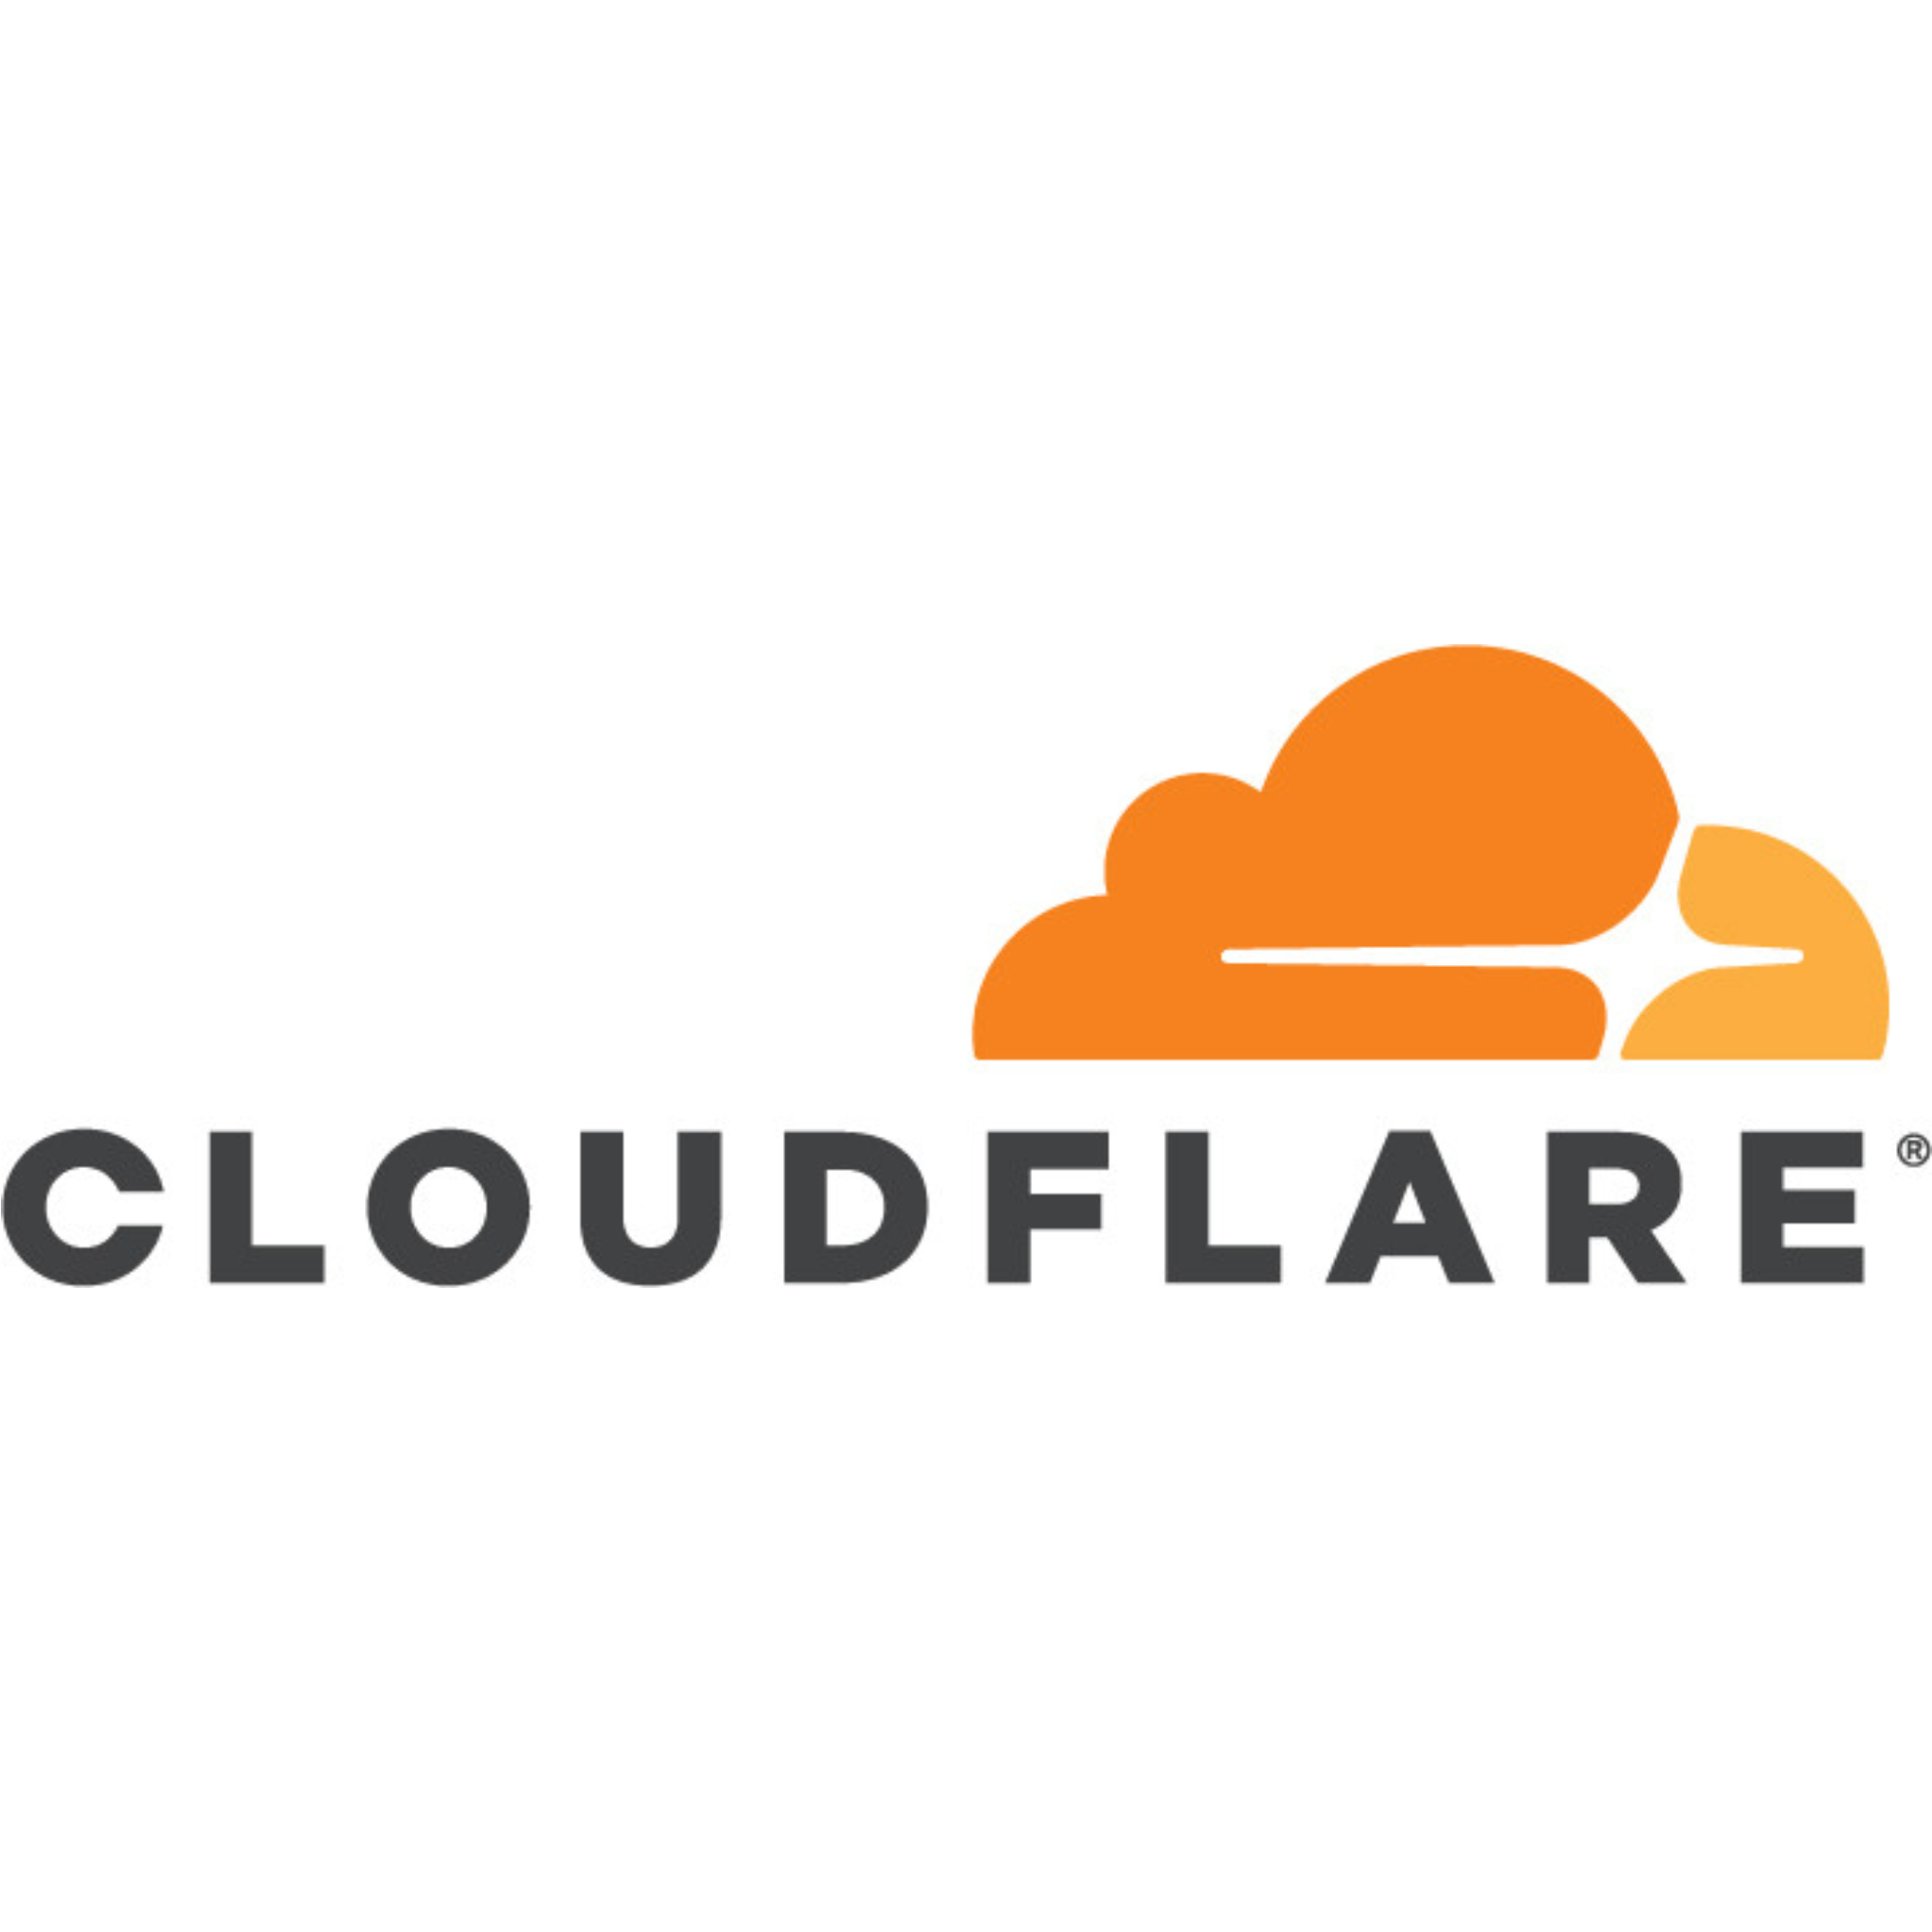 Cloudflare Launches the Most Complete Platform to Deploy Fast, Secure, Compliant AI Inference at Scale-thumnail